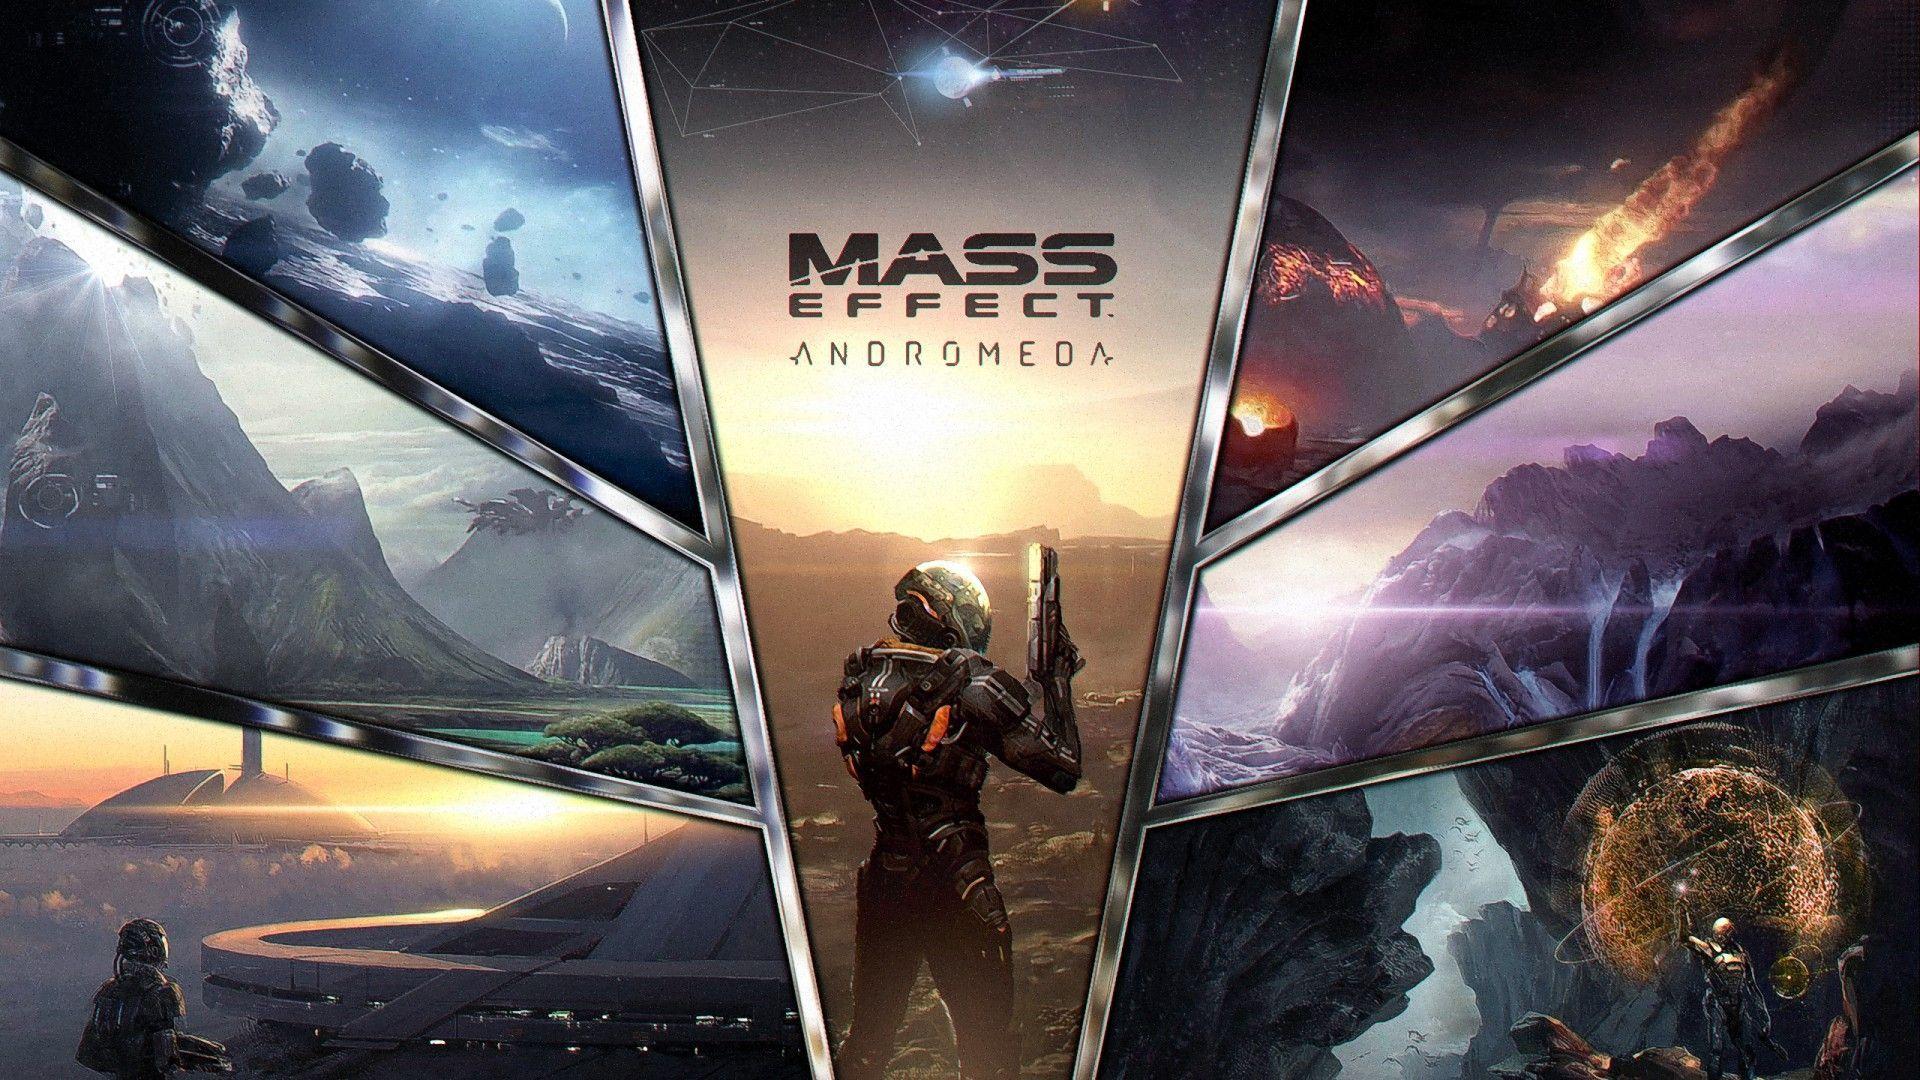 Wallpaper Mass Effect, Andromeda, 2017 Games, PC, PS Xbox, Games